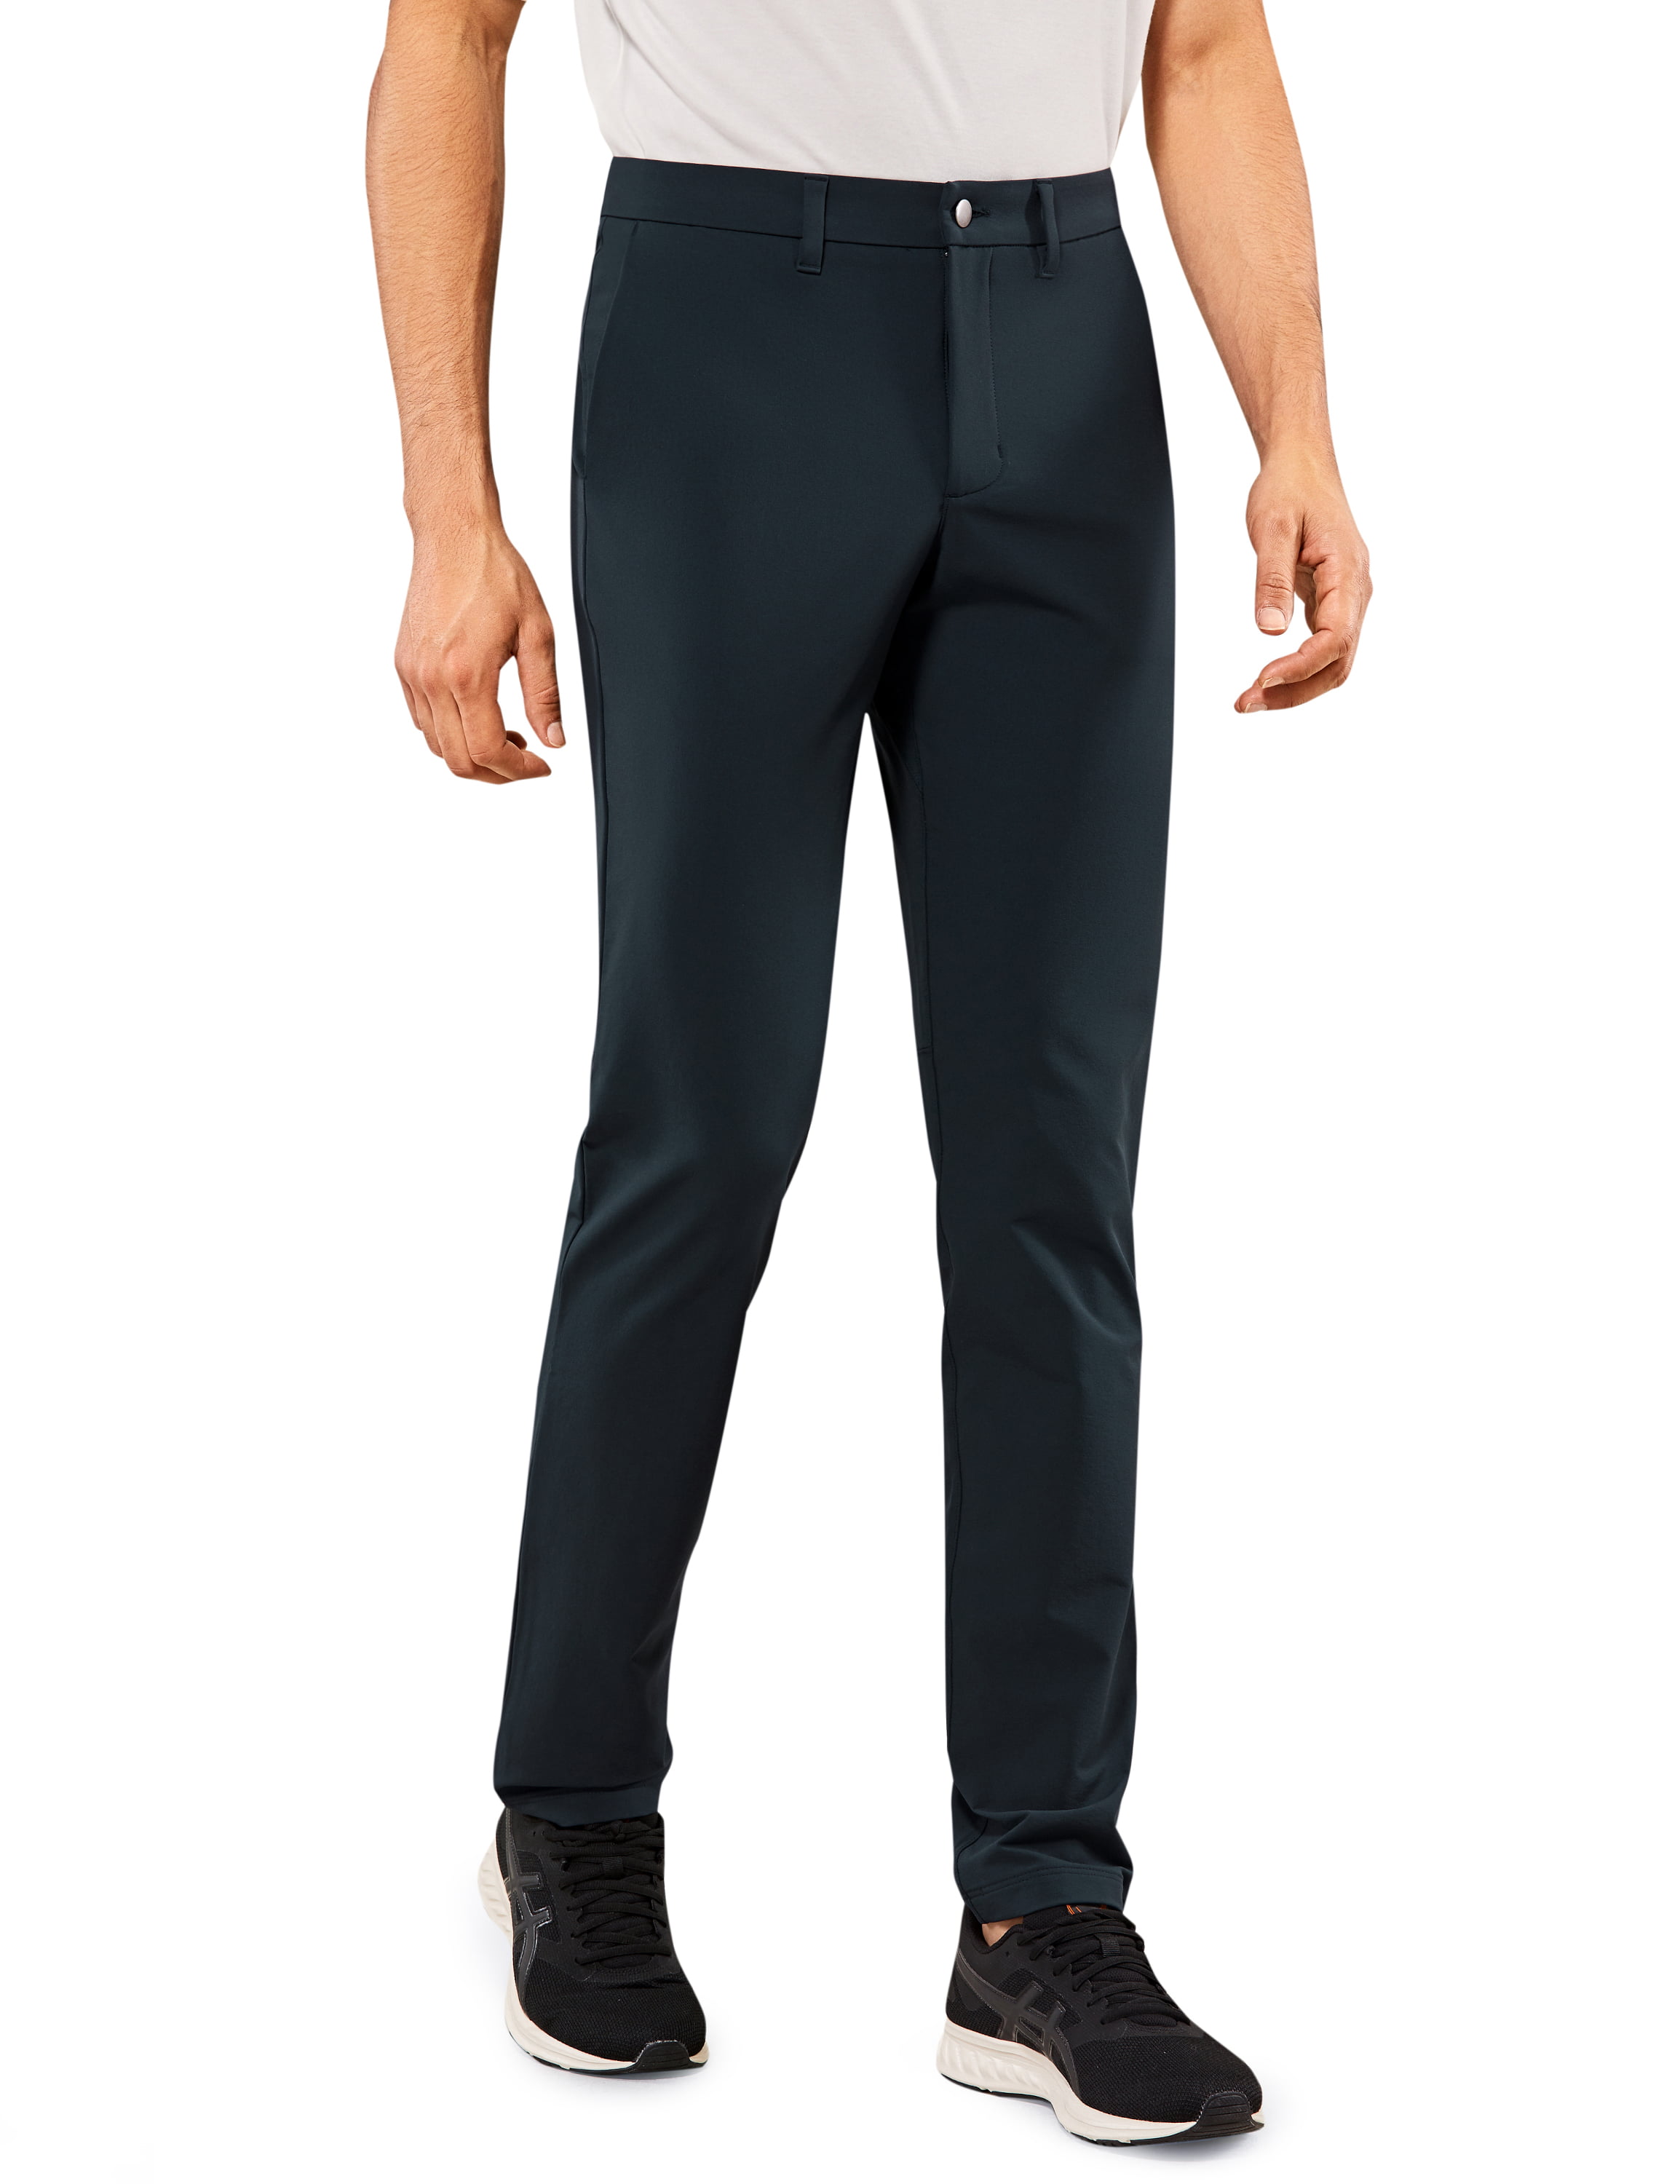 CRZ YOGA Mens Skinny Stretch Slim Casual Solid Dry Feeling Thick Pants with Side Pockets 34 inches